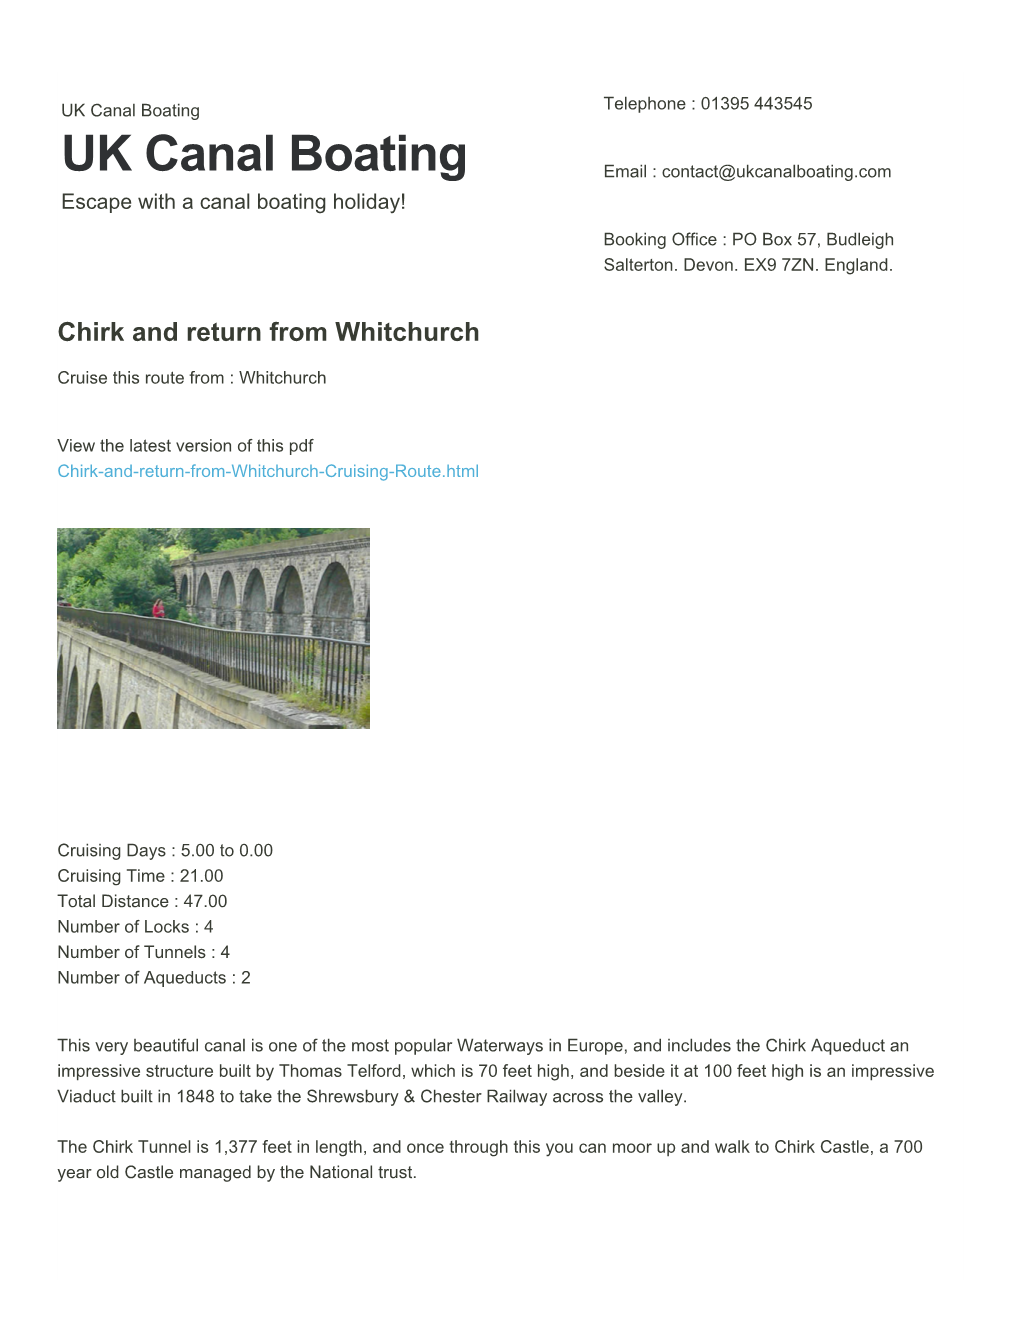 Chirk and Return from Whitchurch | UK Canal Boating